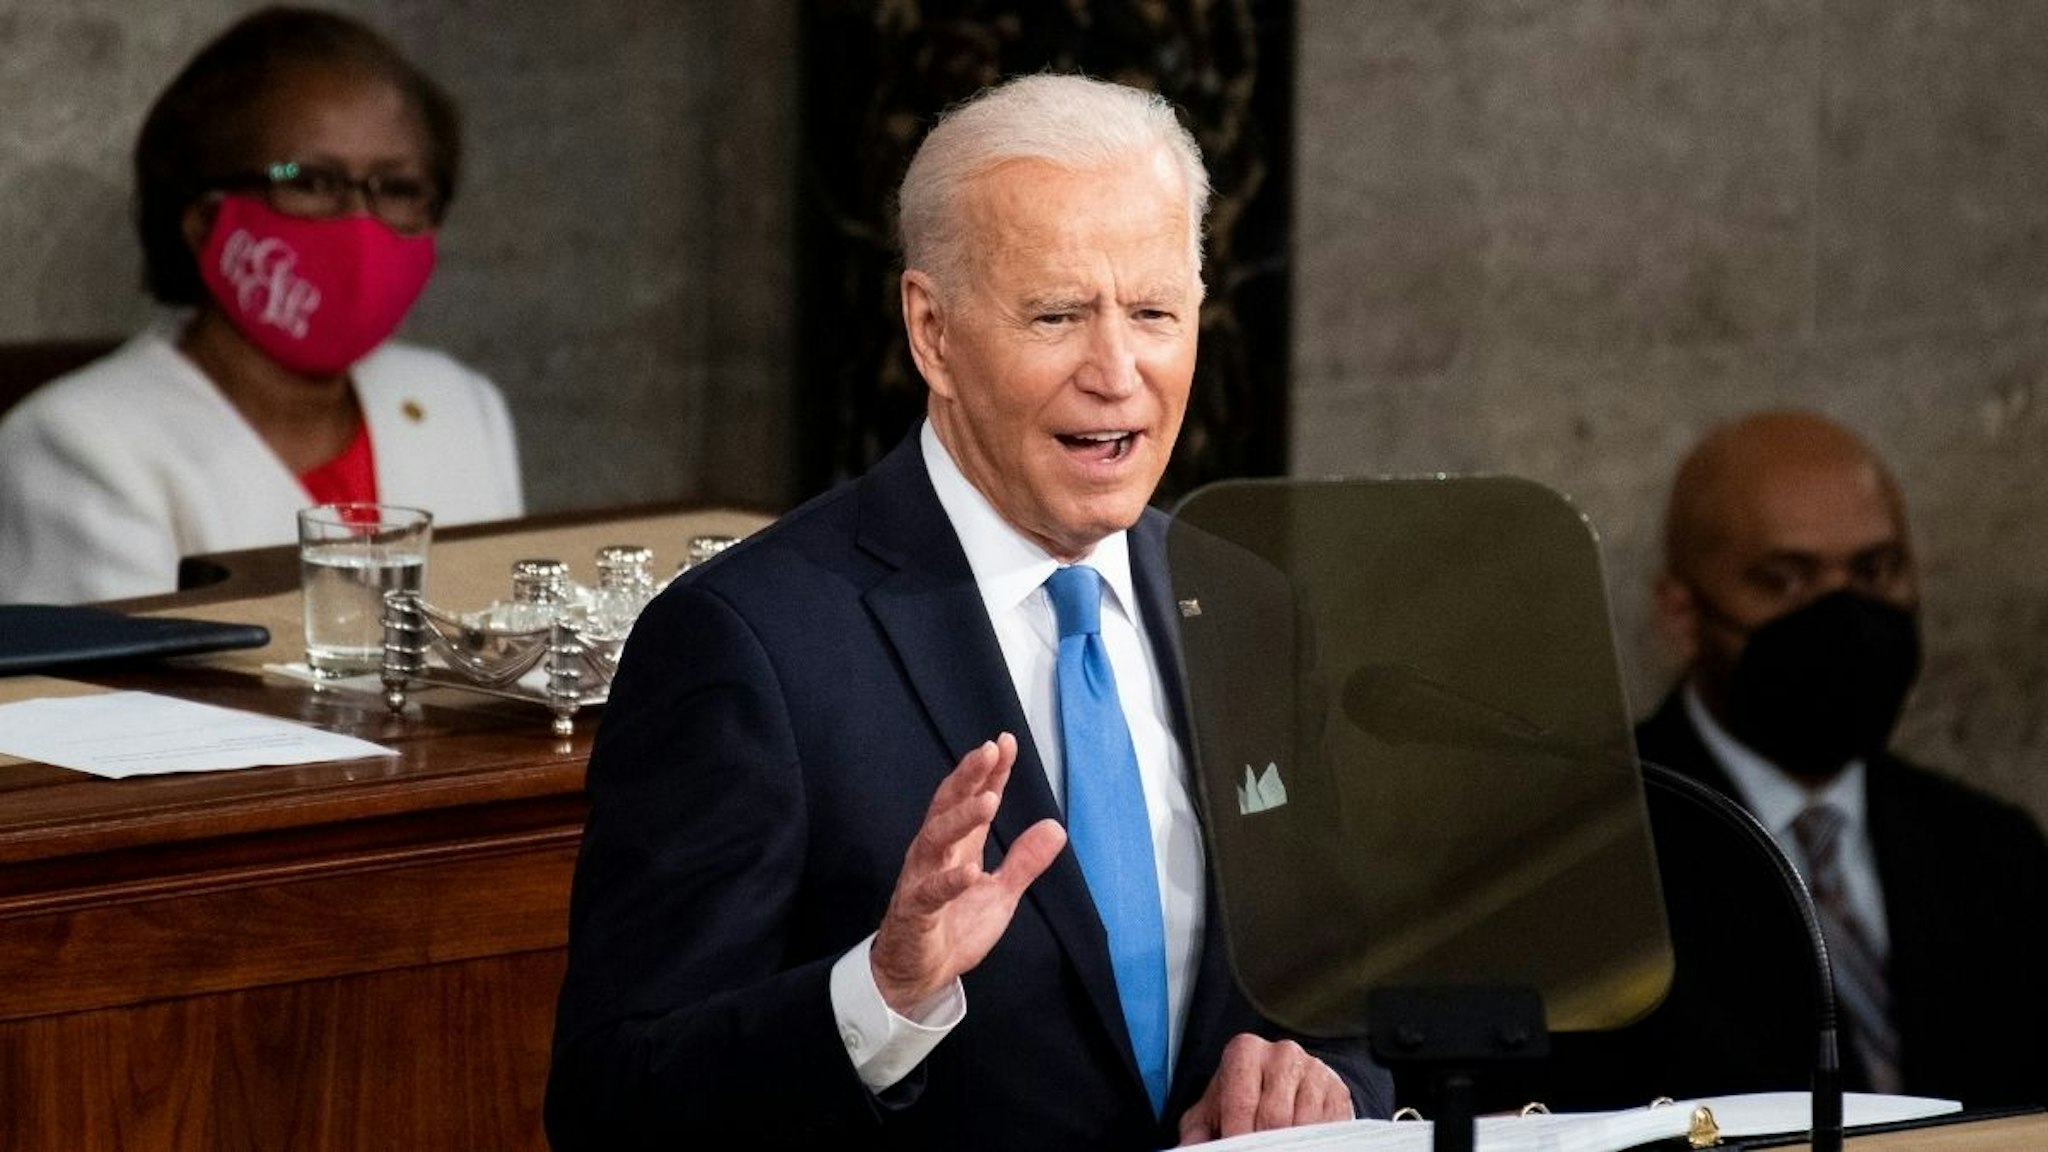 President Joe Biden delivers his address to the joint session of Congress in the House chamber of the U.S. Capitol April 28, 2021 in Washington, DC.